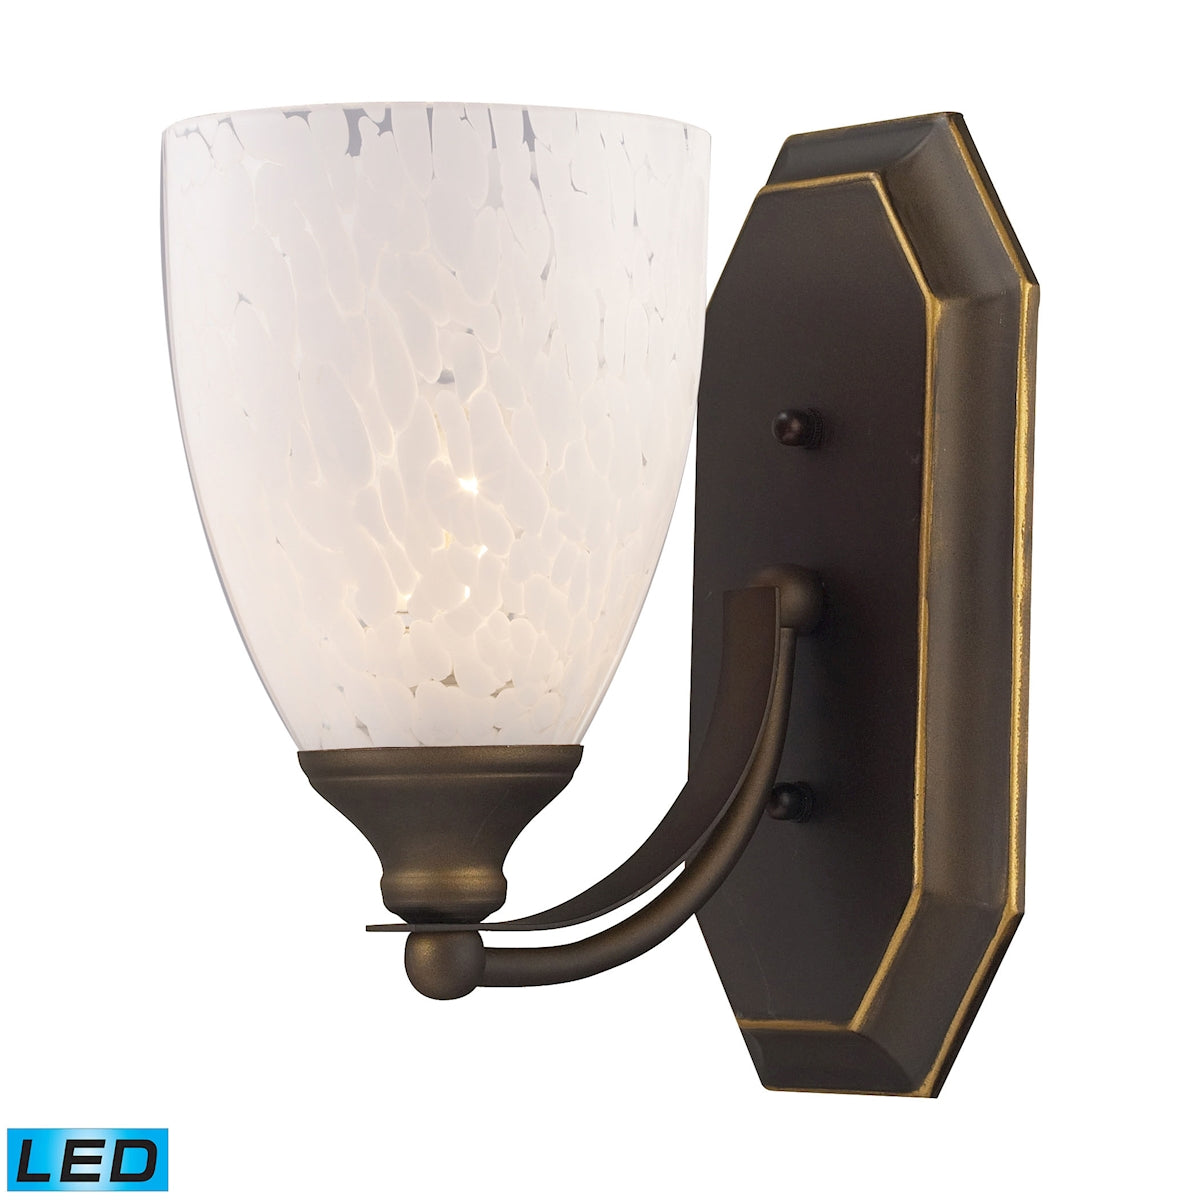 ELK Lighting 570-1B-SW-LED Mix-N-Match Vanity 1-Light Wall Lamp in Aged Bronze with Snow White Glass - Includes LED Bulb